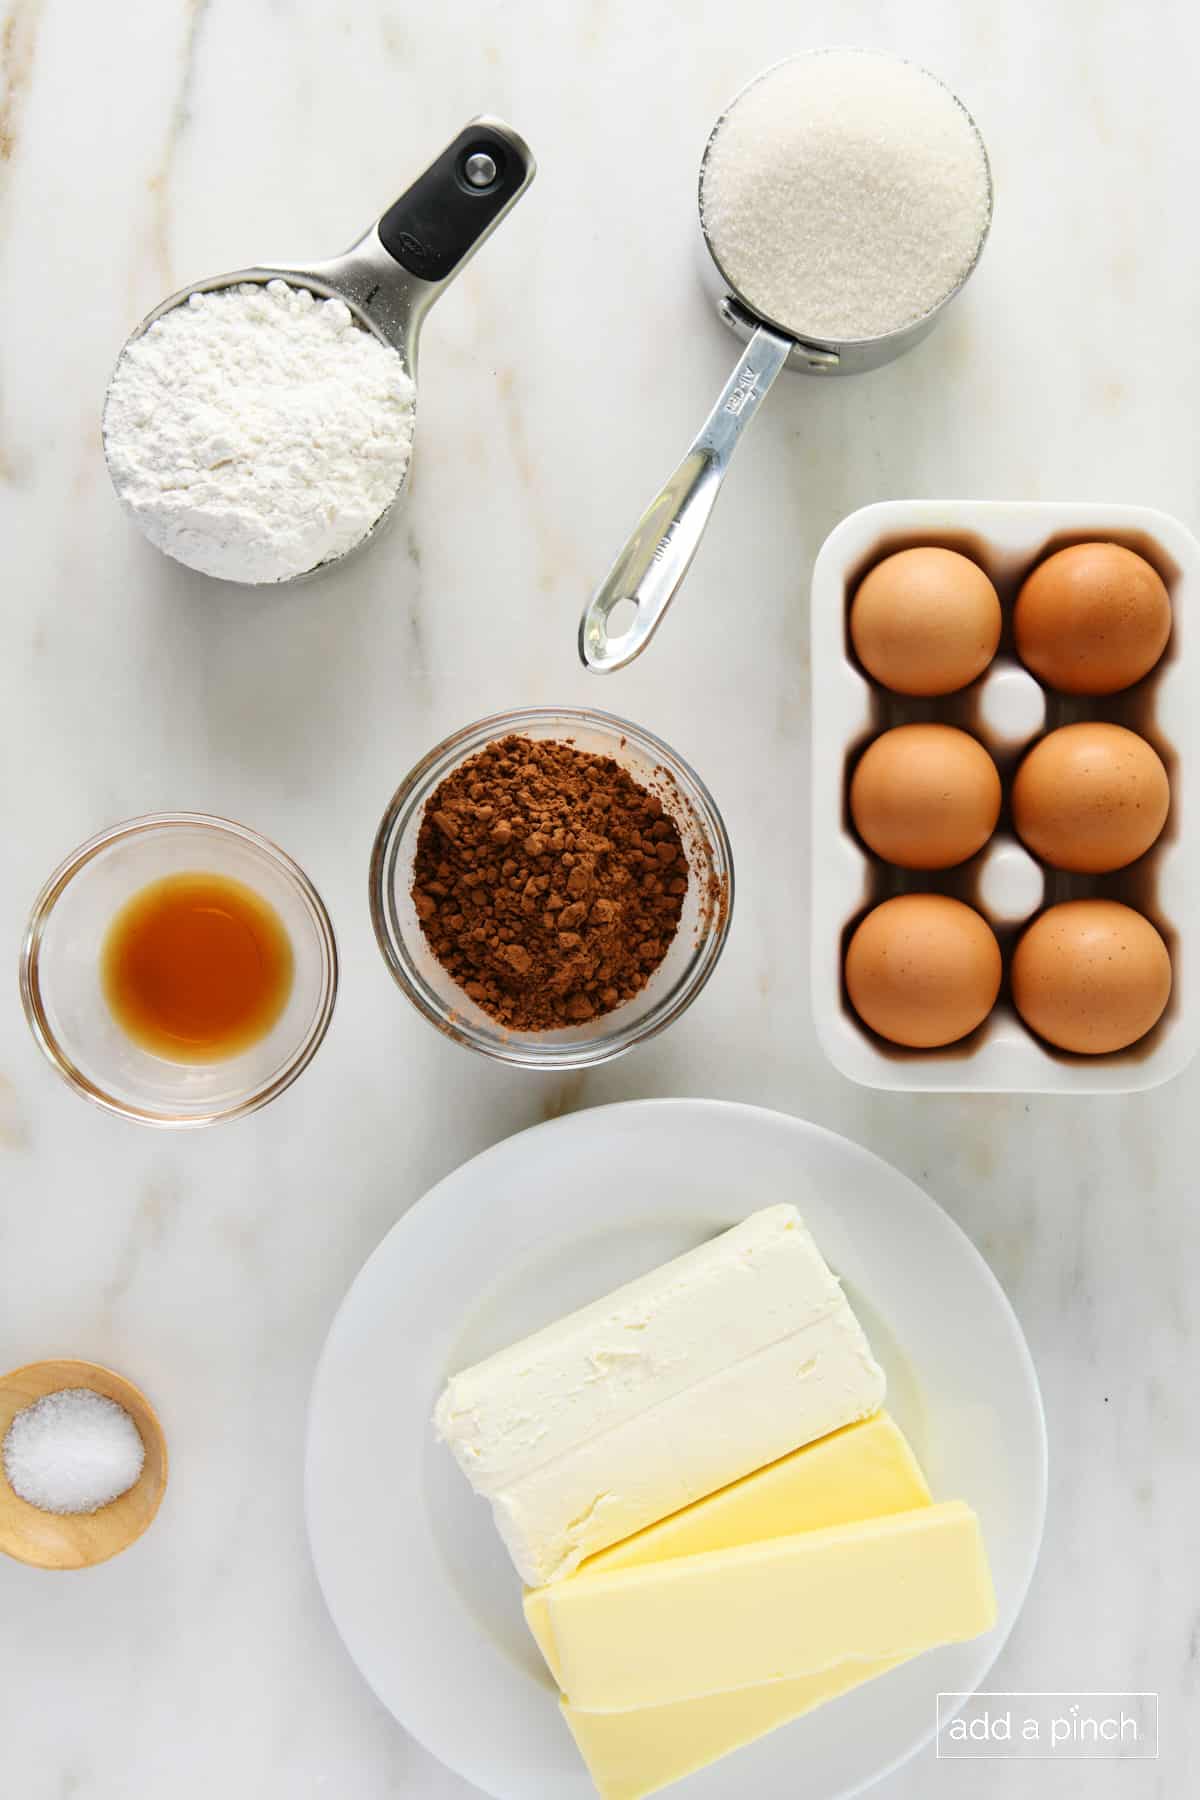 Photo of ingredients used to make chocolate pound cake on a marble surface.